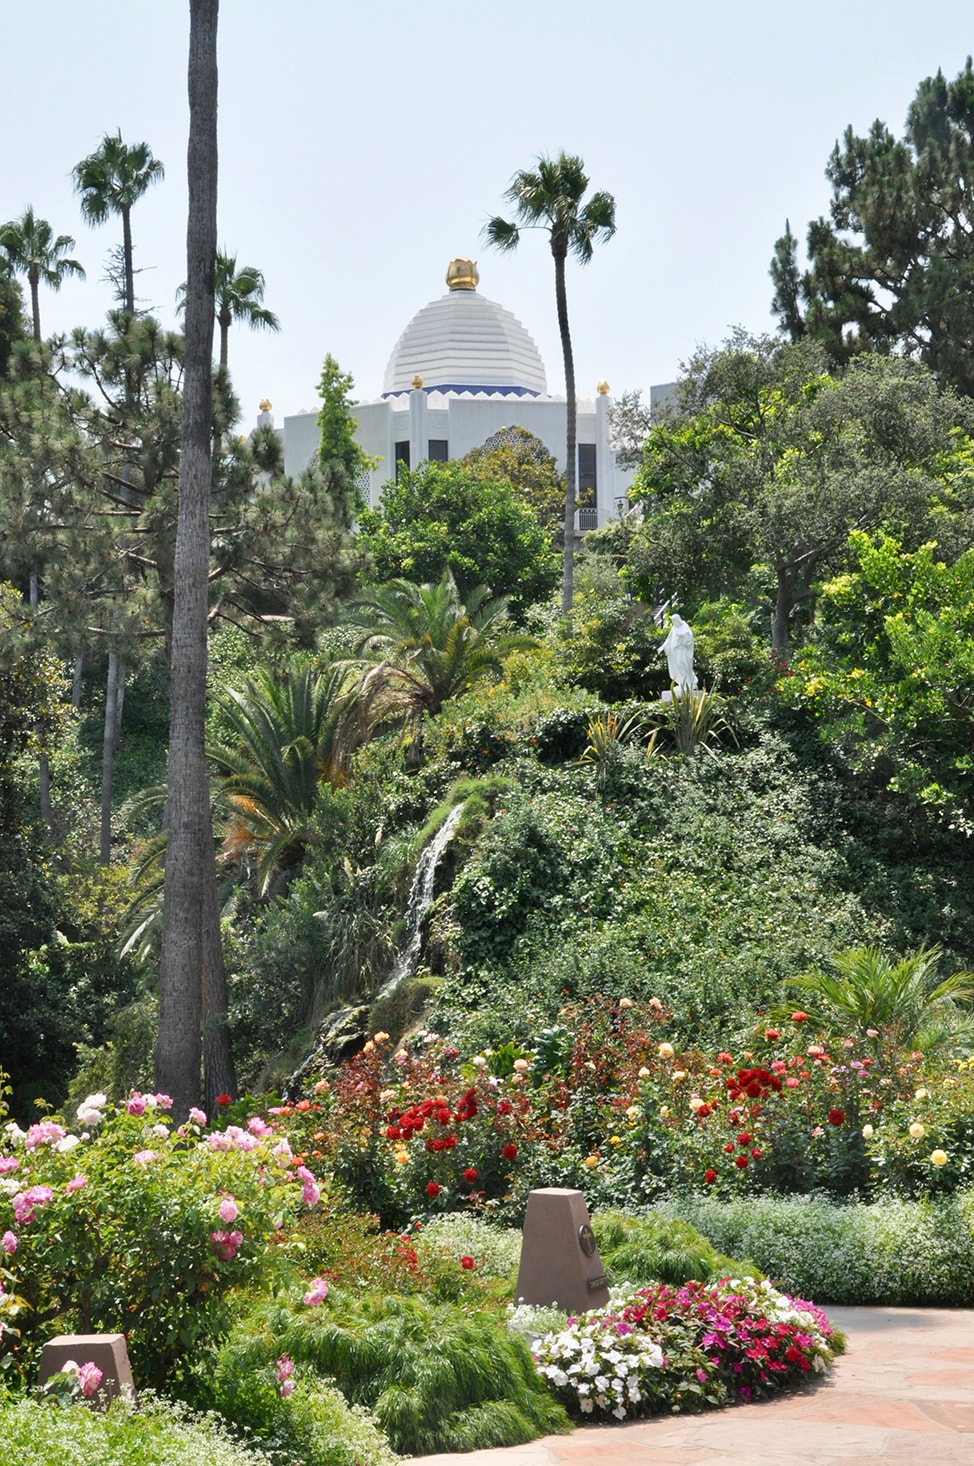 The gold, white and blue dome of the main chapel sits on a hill overlooking the Lake Shrine in Malibu